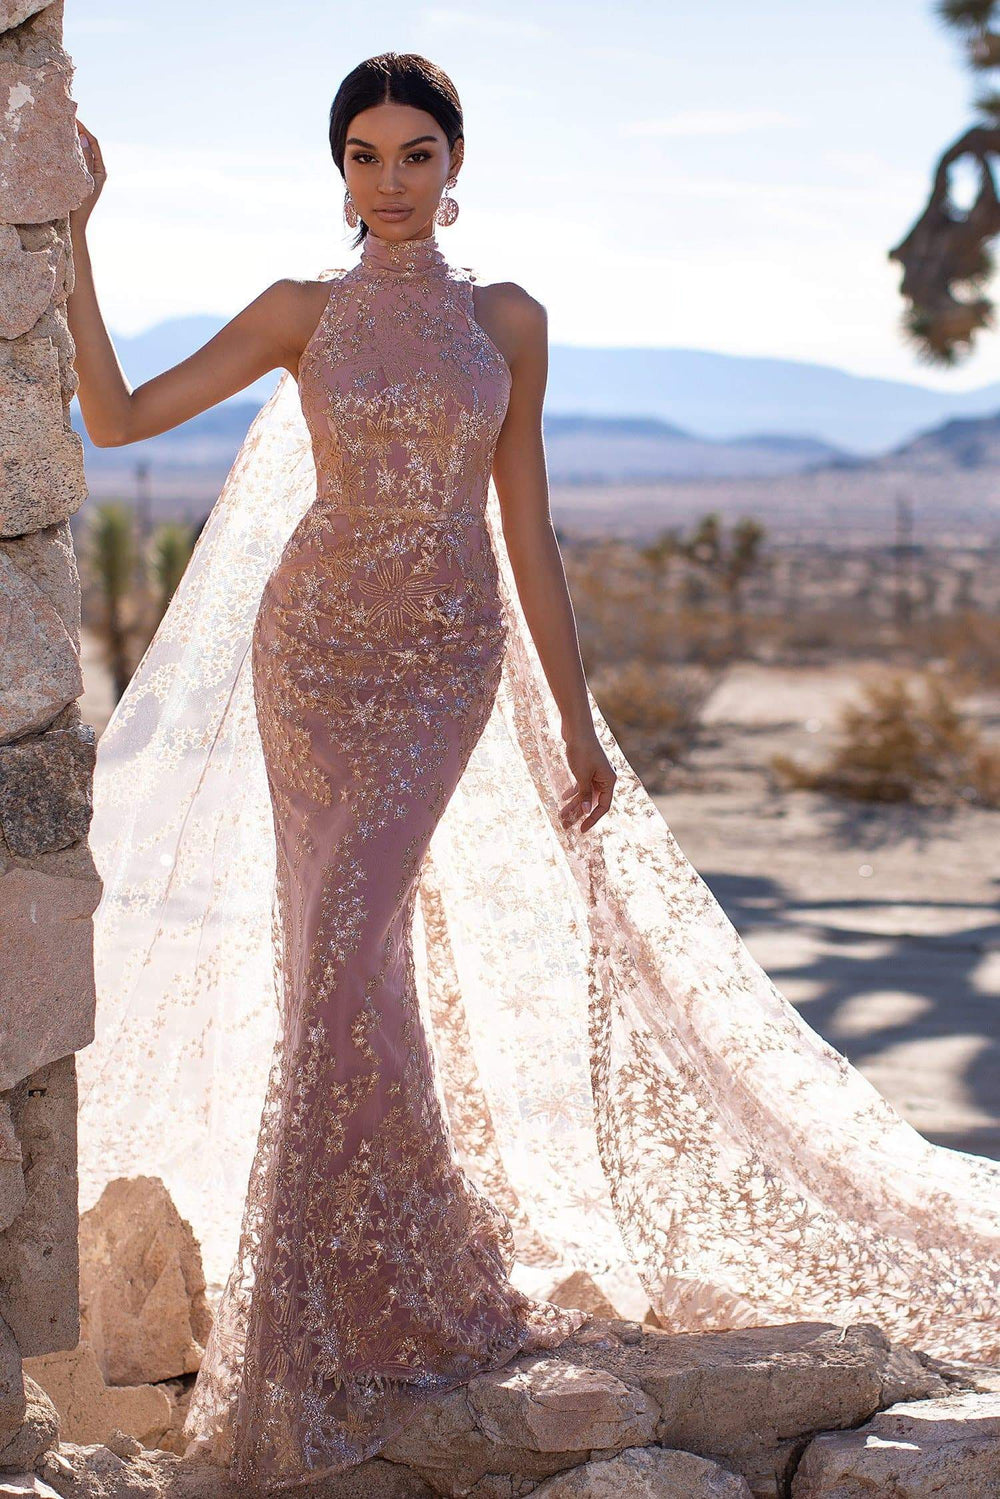 A&N Luxe Tyra -High Neck Rose Gold Glitter Cape Gown with Mermaid Train